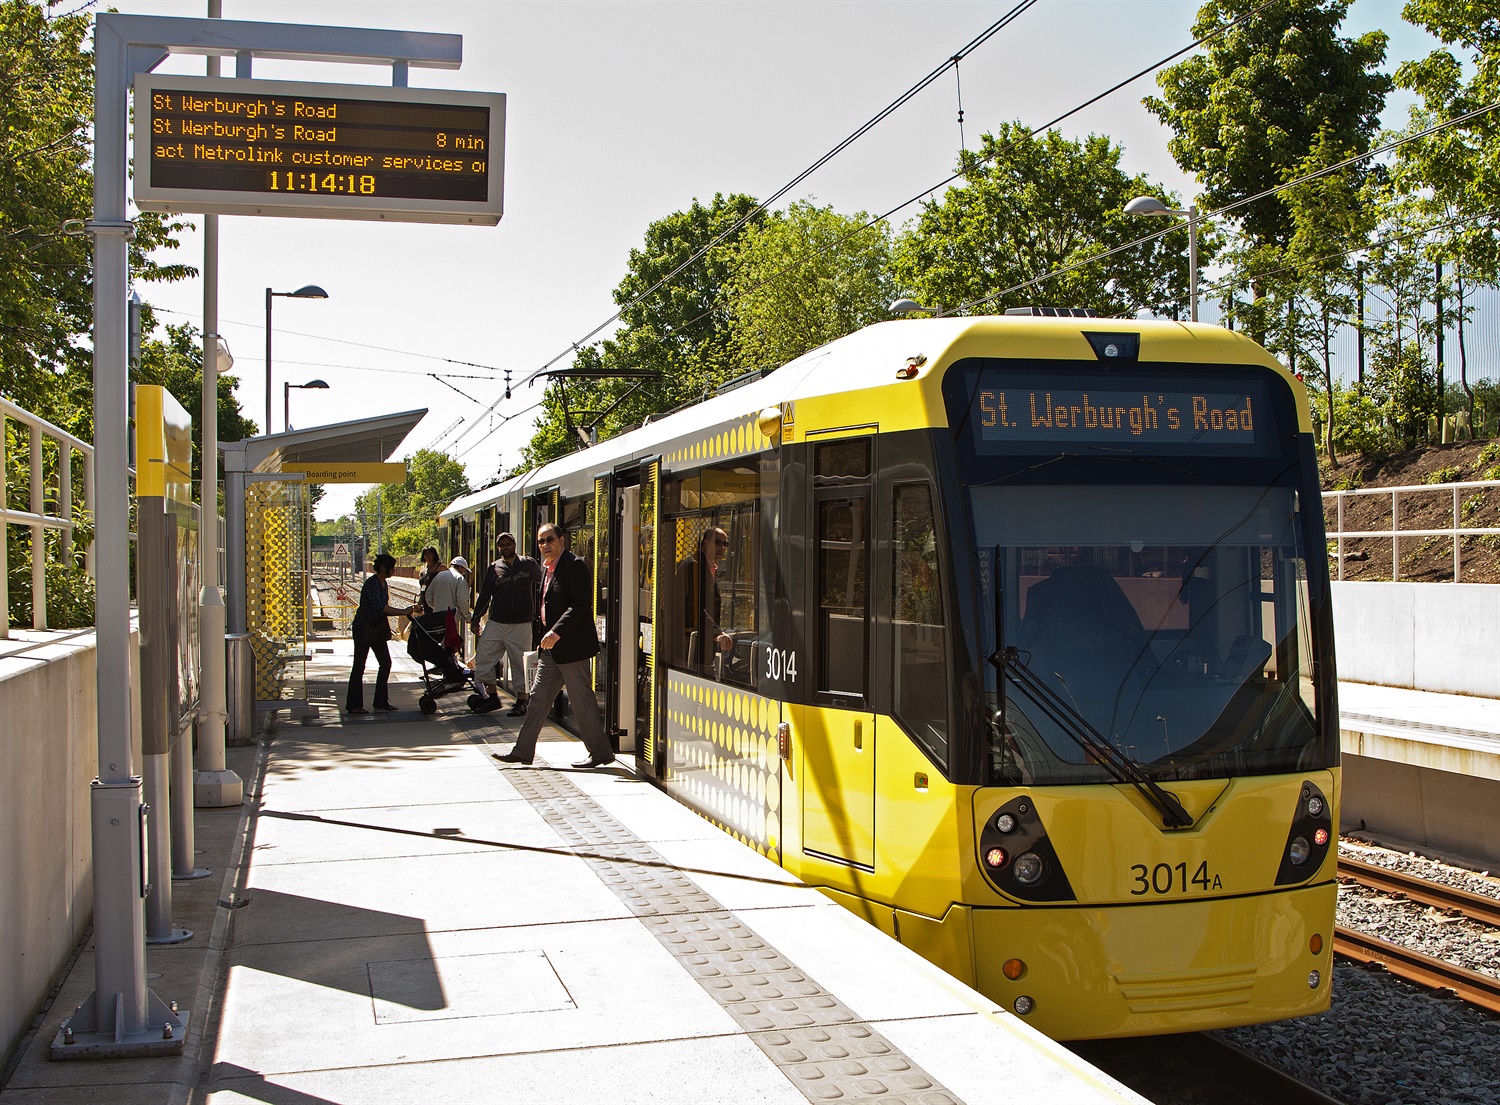 Exclusive: Fare-dodging on Metrolink costs £8m in three years